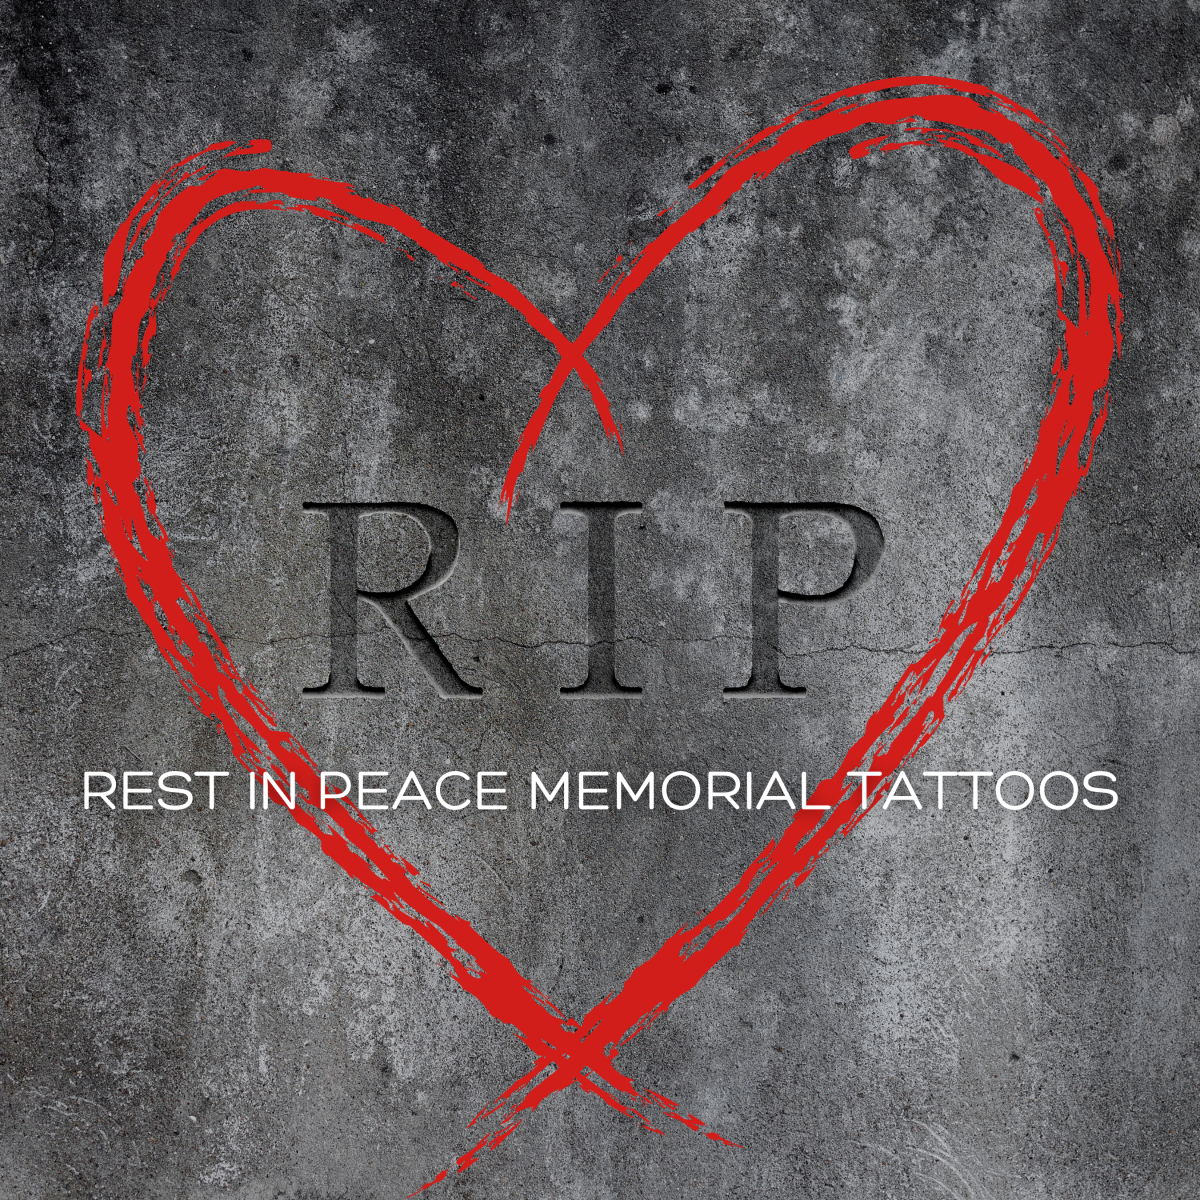 Rest In Peace (R.I.P.) Memorial Tattoos: Everything You Want to Know